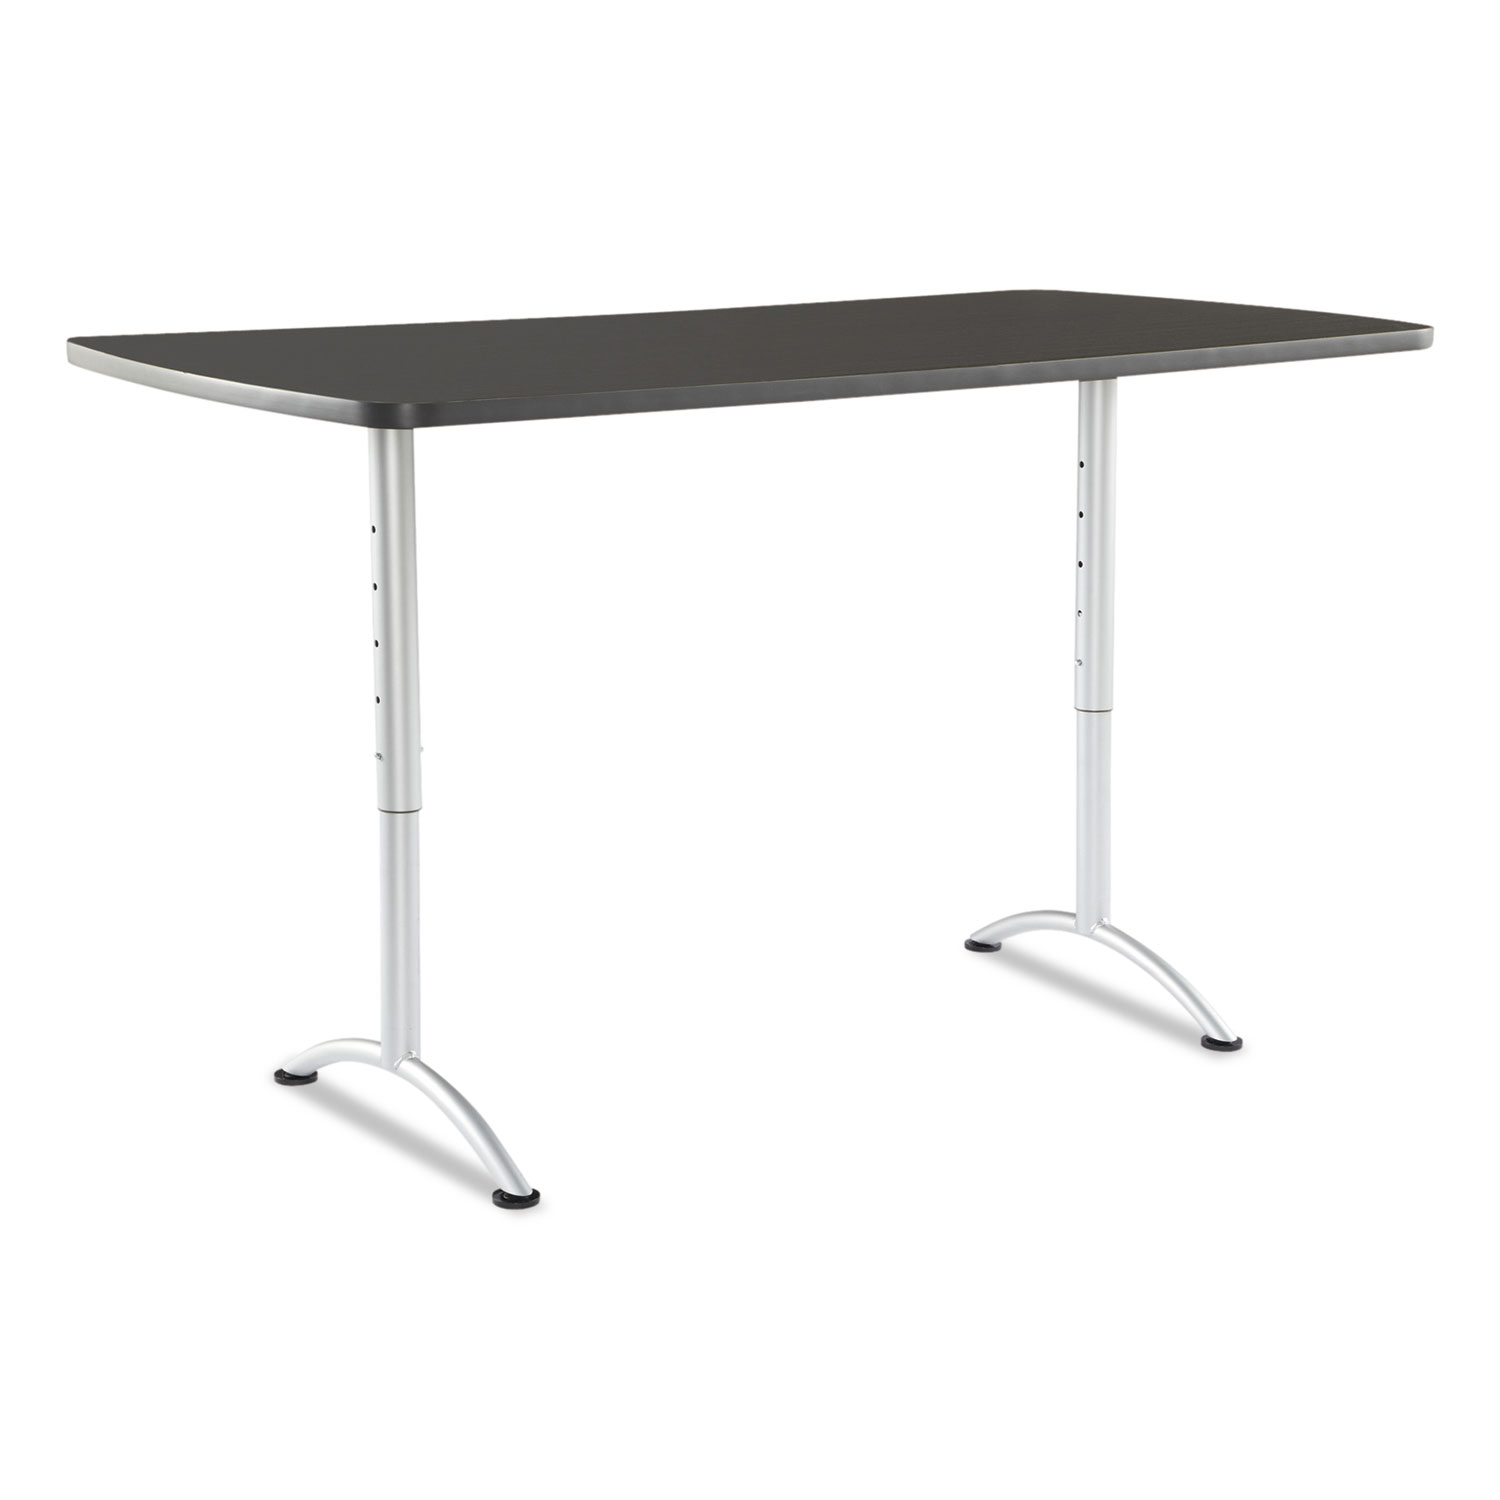  Iceberg 69327 ARC Sit-to-Stand Tables, Rectangular Top, 36w x 72d x 30-42h, Graphite/Silver (ICE69327) 